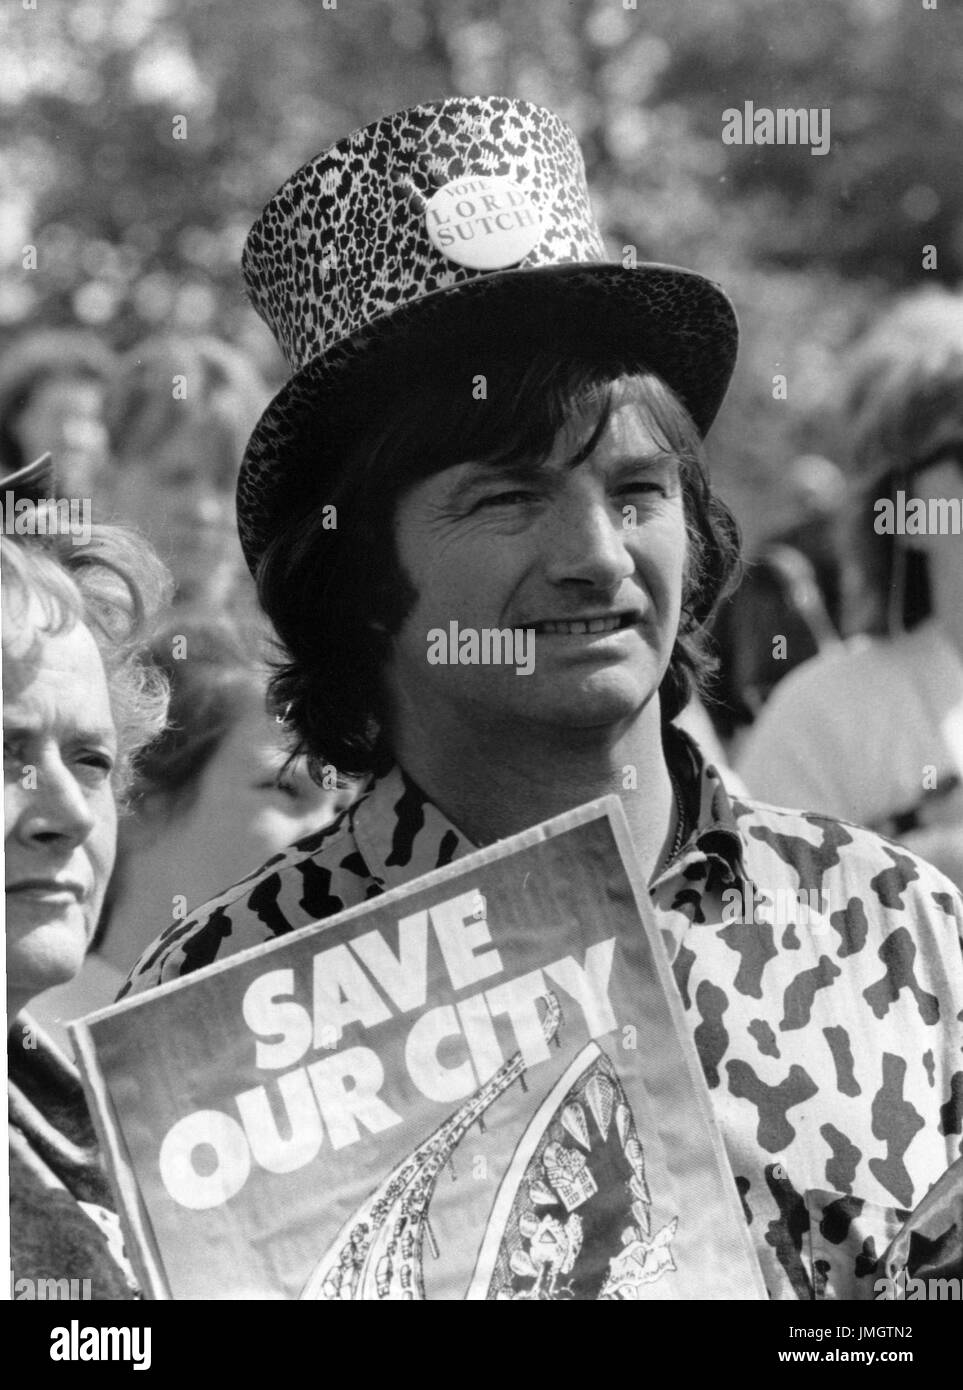 Screaming Lord Sutch, Rock and Roll singer, takes part in the Action Against London's Roads demonstration in London, England on June 4, 1989. Real name David Sutch, he was well known for standing in British parliamentary elections on behalf of the Monster Raving Loony Party. Stock Photo